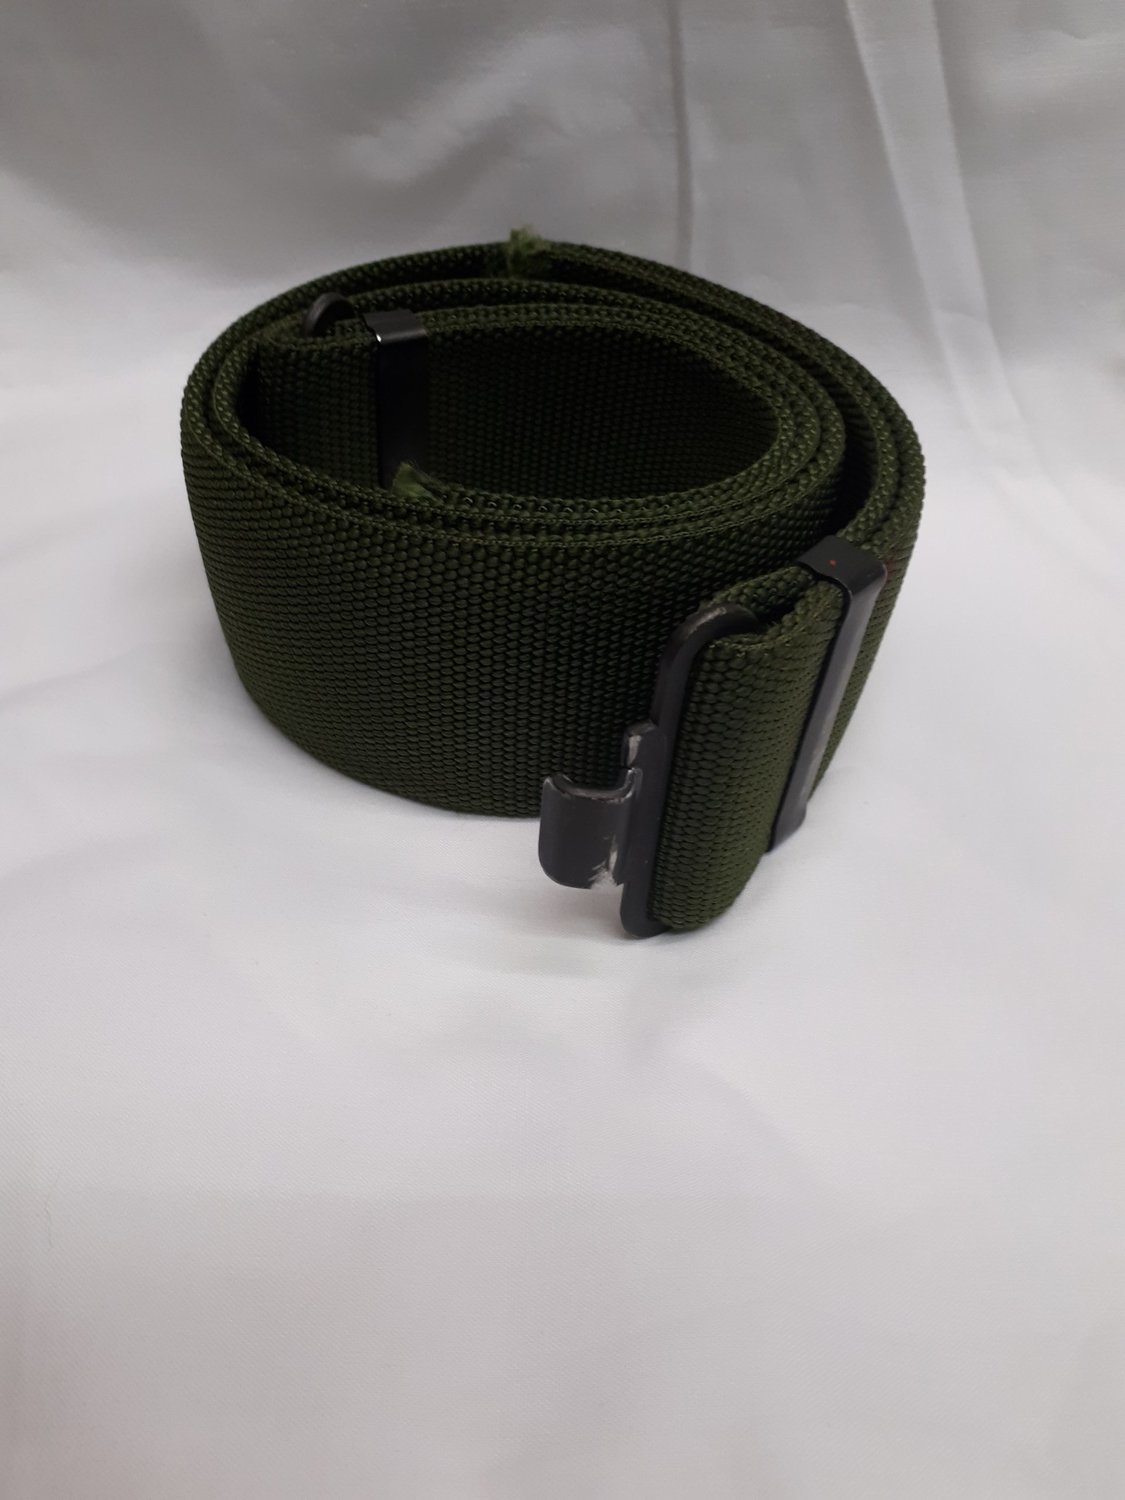 British Army Military Green in Colour Used Army Belt 95 British Army Belt 